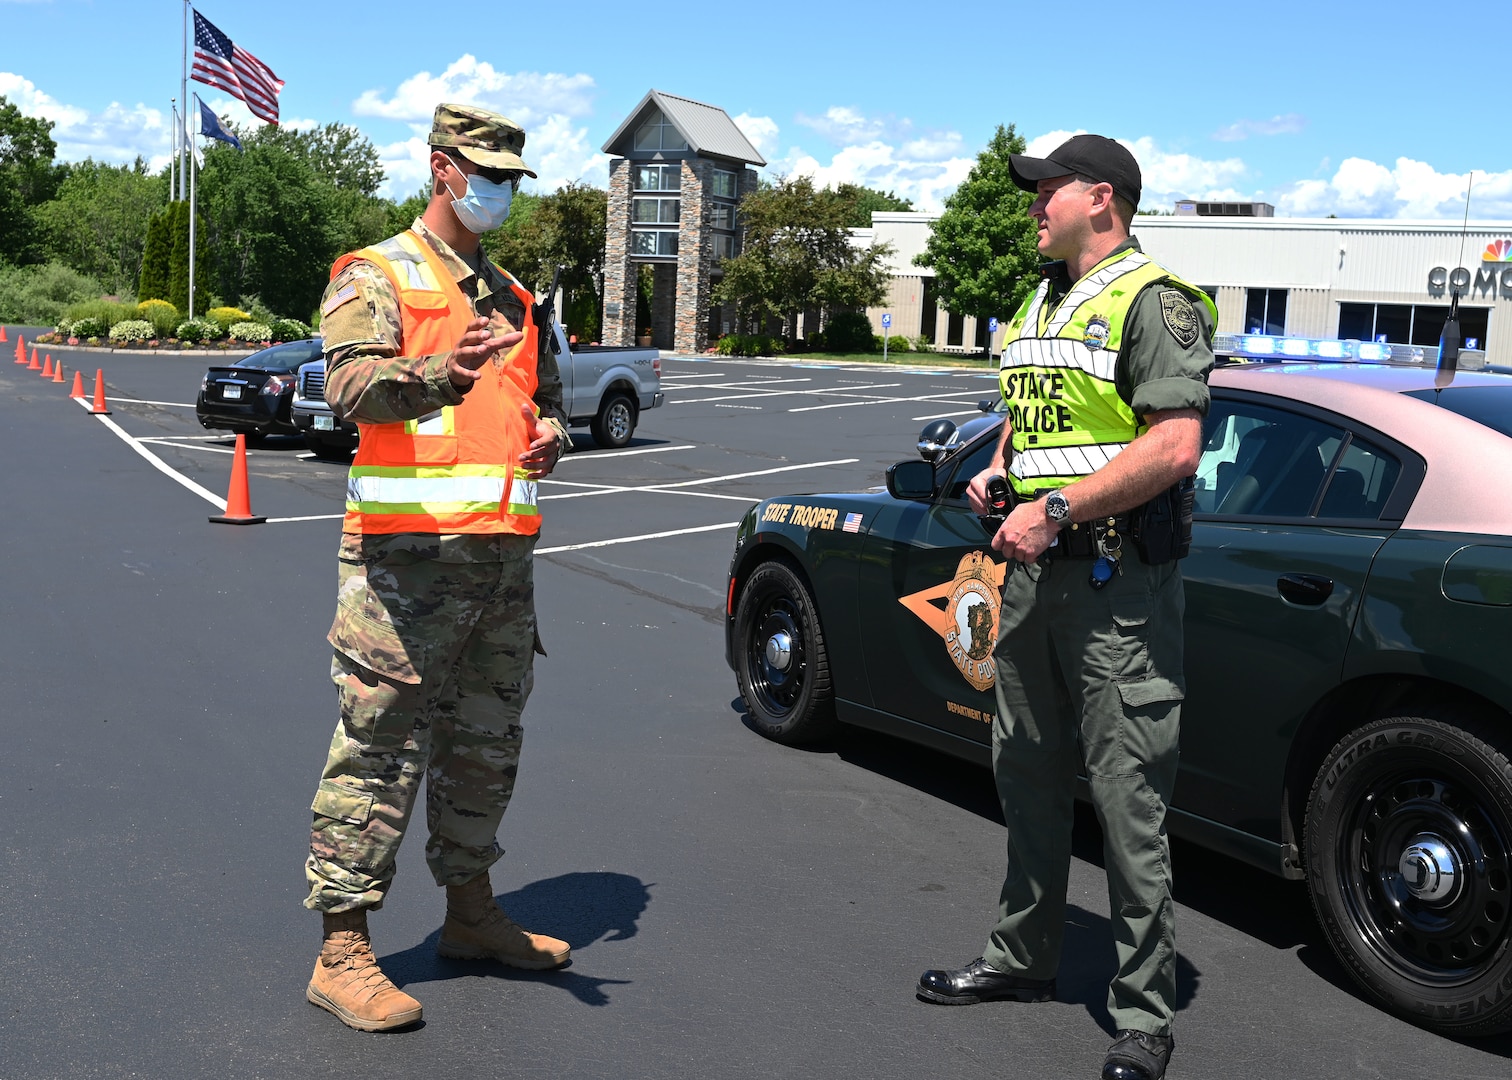 Spc. Ryan Stone, 197th Field Artillery Brigade, New Hampshire Army National Guard, and Trooper Doug Bailey of Troop B, New Hampshire State Police, work a traffic post at a mobile food pantry conducted on June 26 in Manchester.